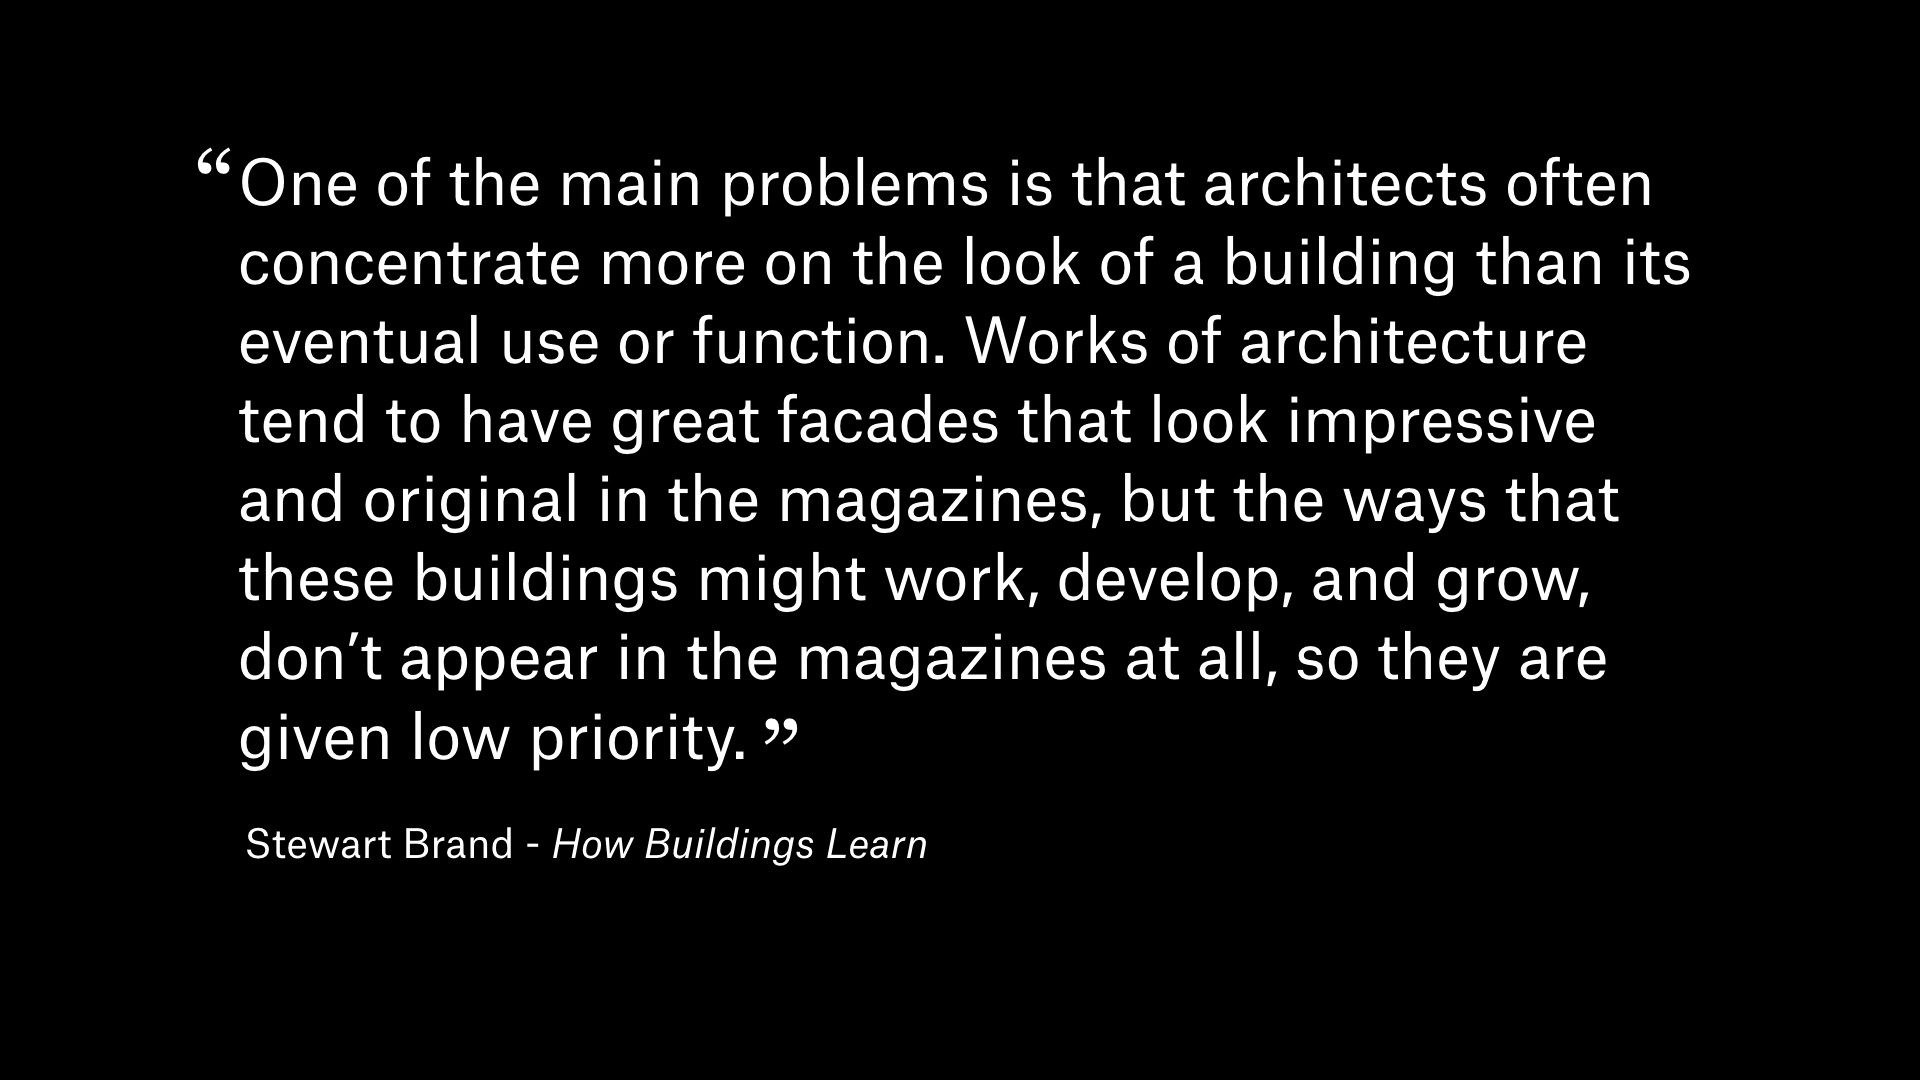 Quote by Stewart Brand from 'How Buildings Learn': One of the main problems is that architects often concentrate more on the look of a building than its eventual use or function. Works of architecture tend to have great facades that look impressive and original in the magazines, but the ways that these buildings might work, develop, and grow, don't appear in the magazines at all, so they are given low priority.